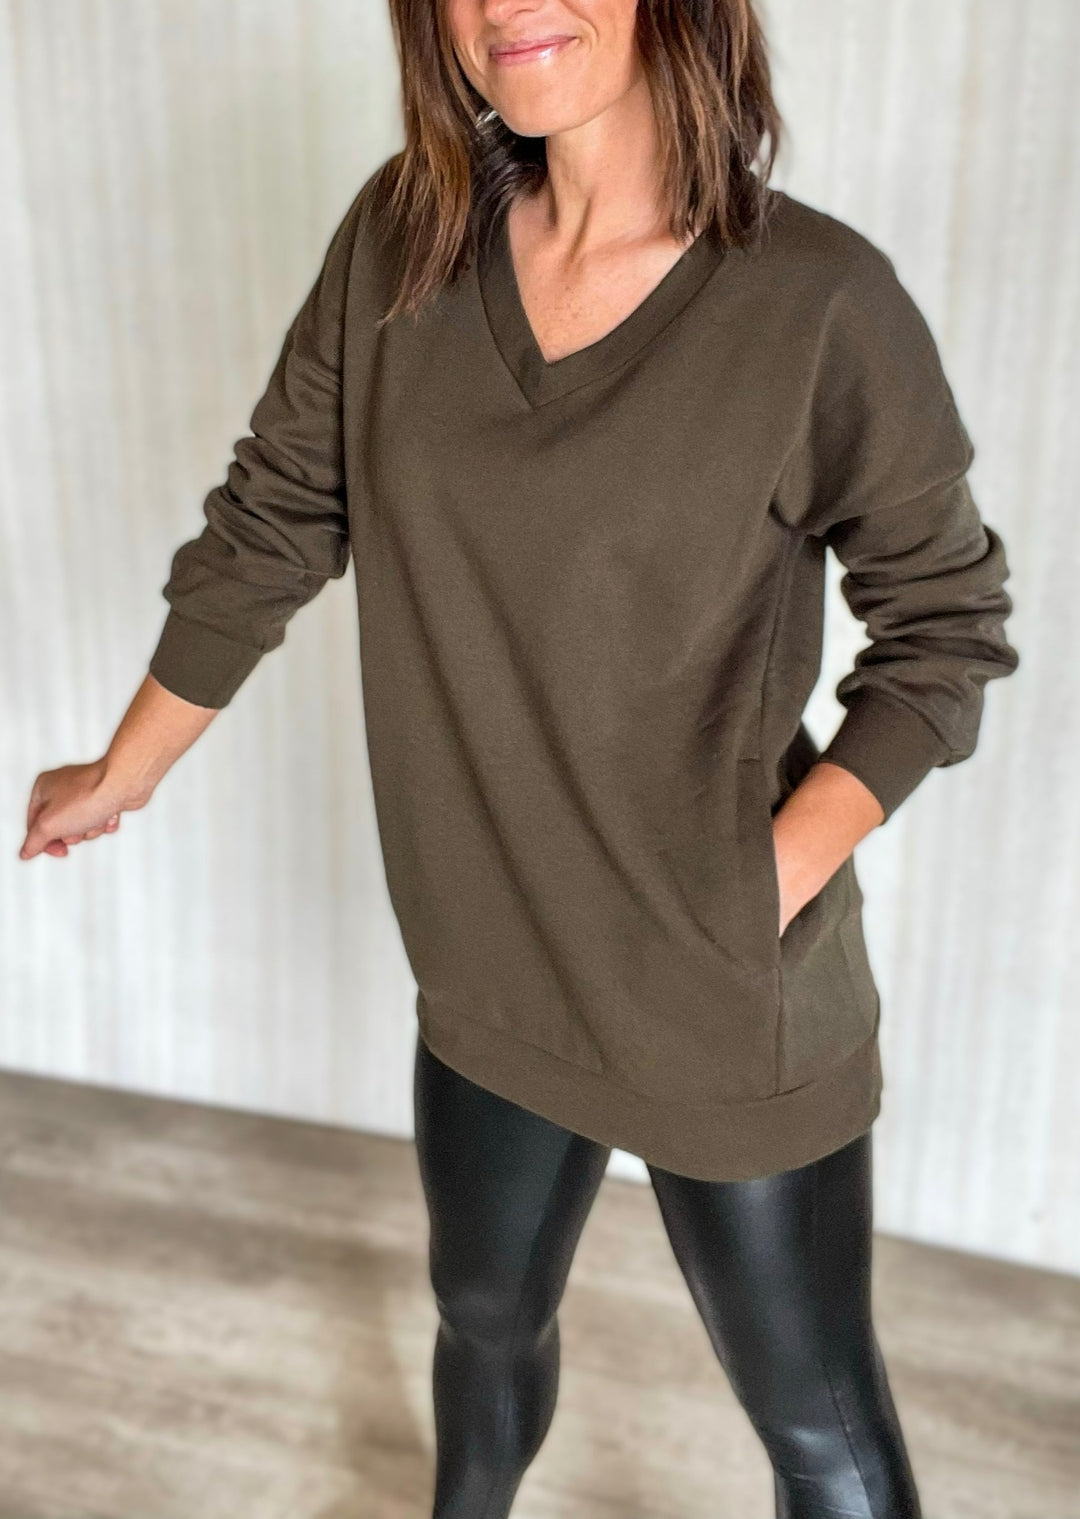 Olive Green V-Neck Pullover Sweatshirt with Pockets and Black Faux Leather Leggings